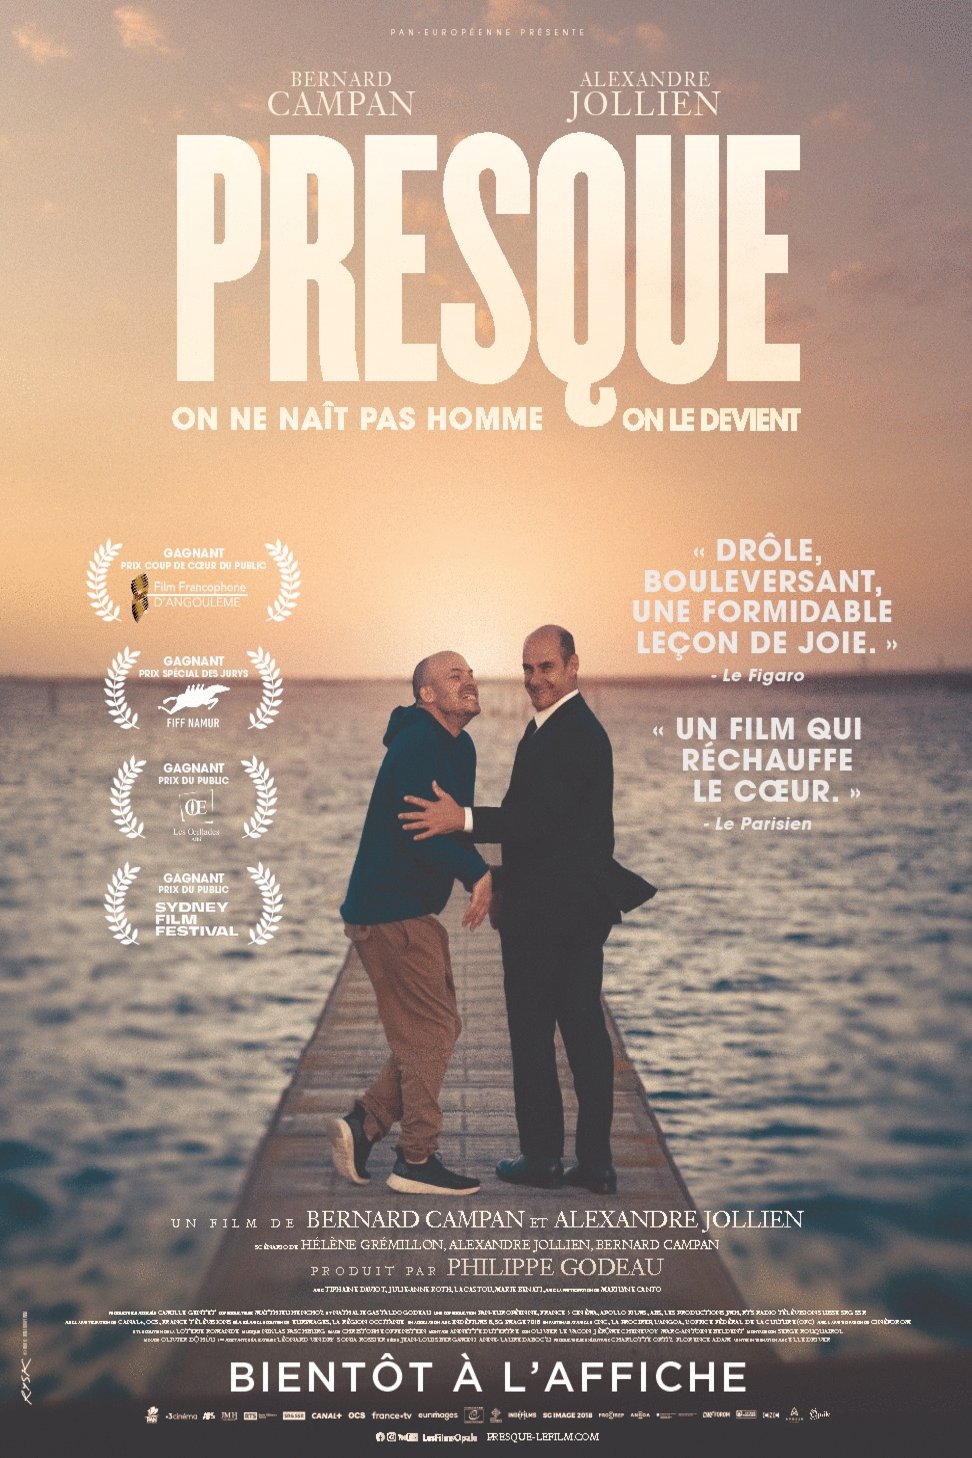 Poster of the movie Presque